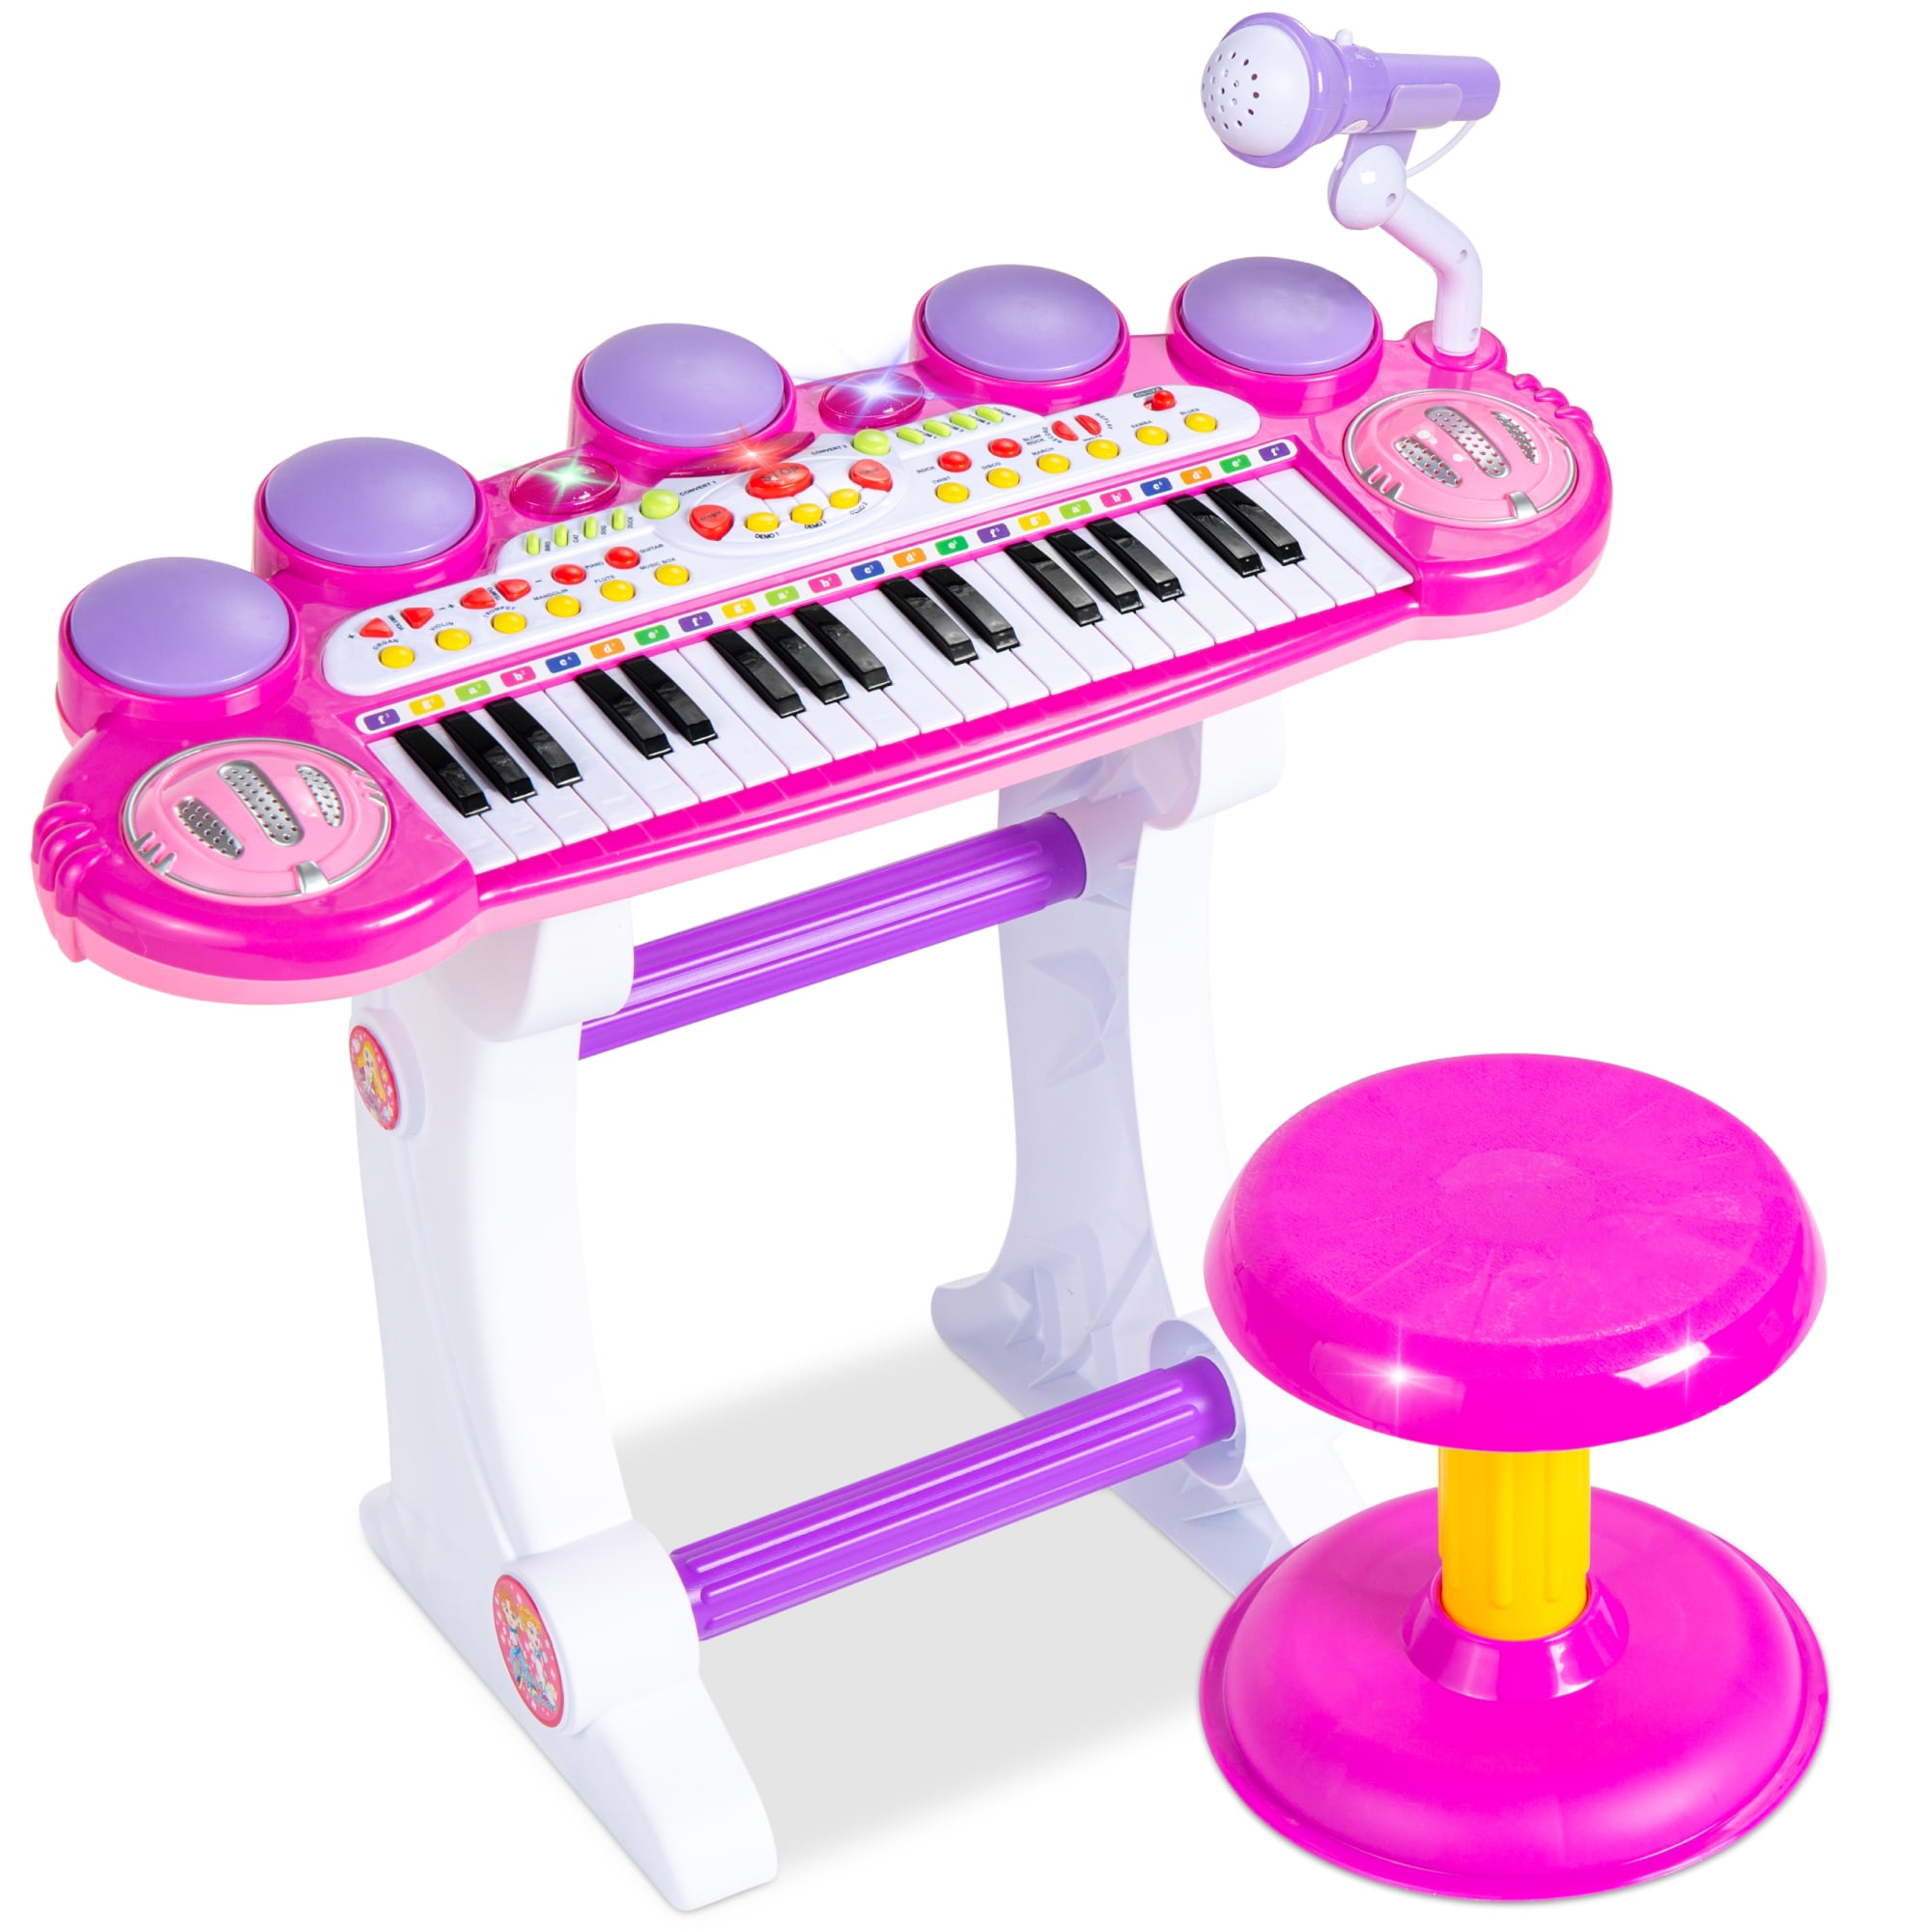 Electronic Piano for Kids 37 Keys Kids Piano Keyboard Music Keyboard Piano with Microphone Educational Toy Gifts for Girls Boys Ages 3-6 Years Old Pink 